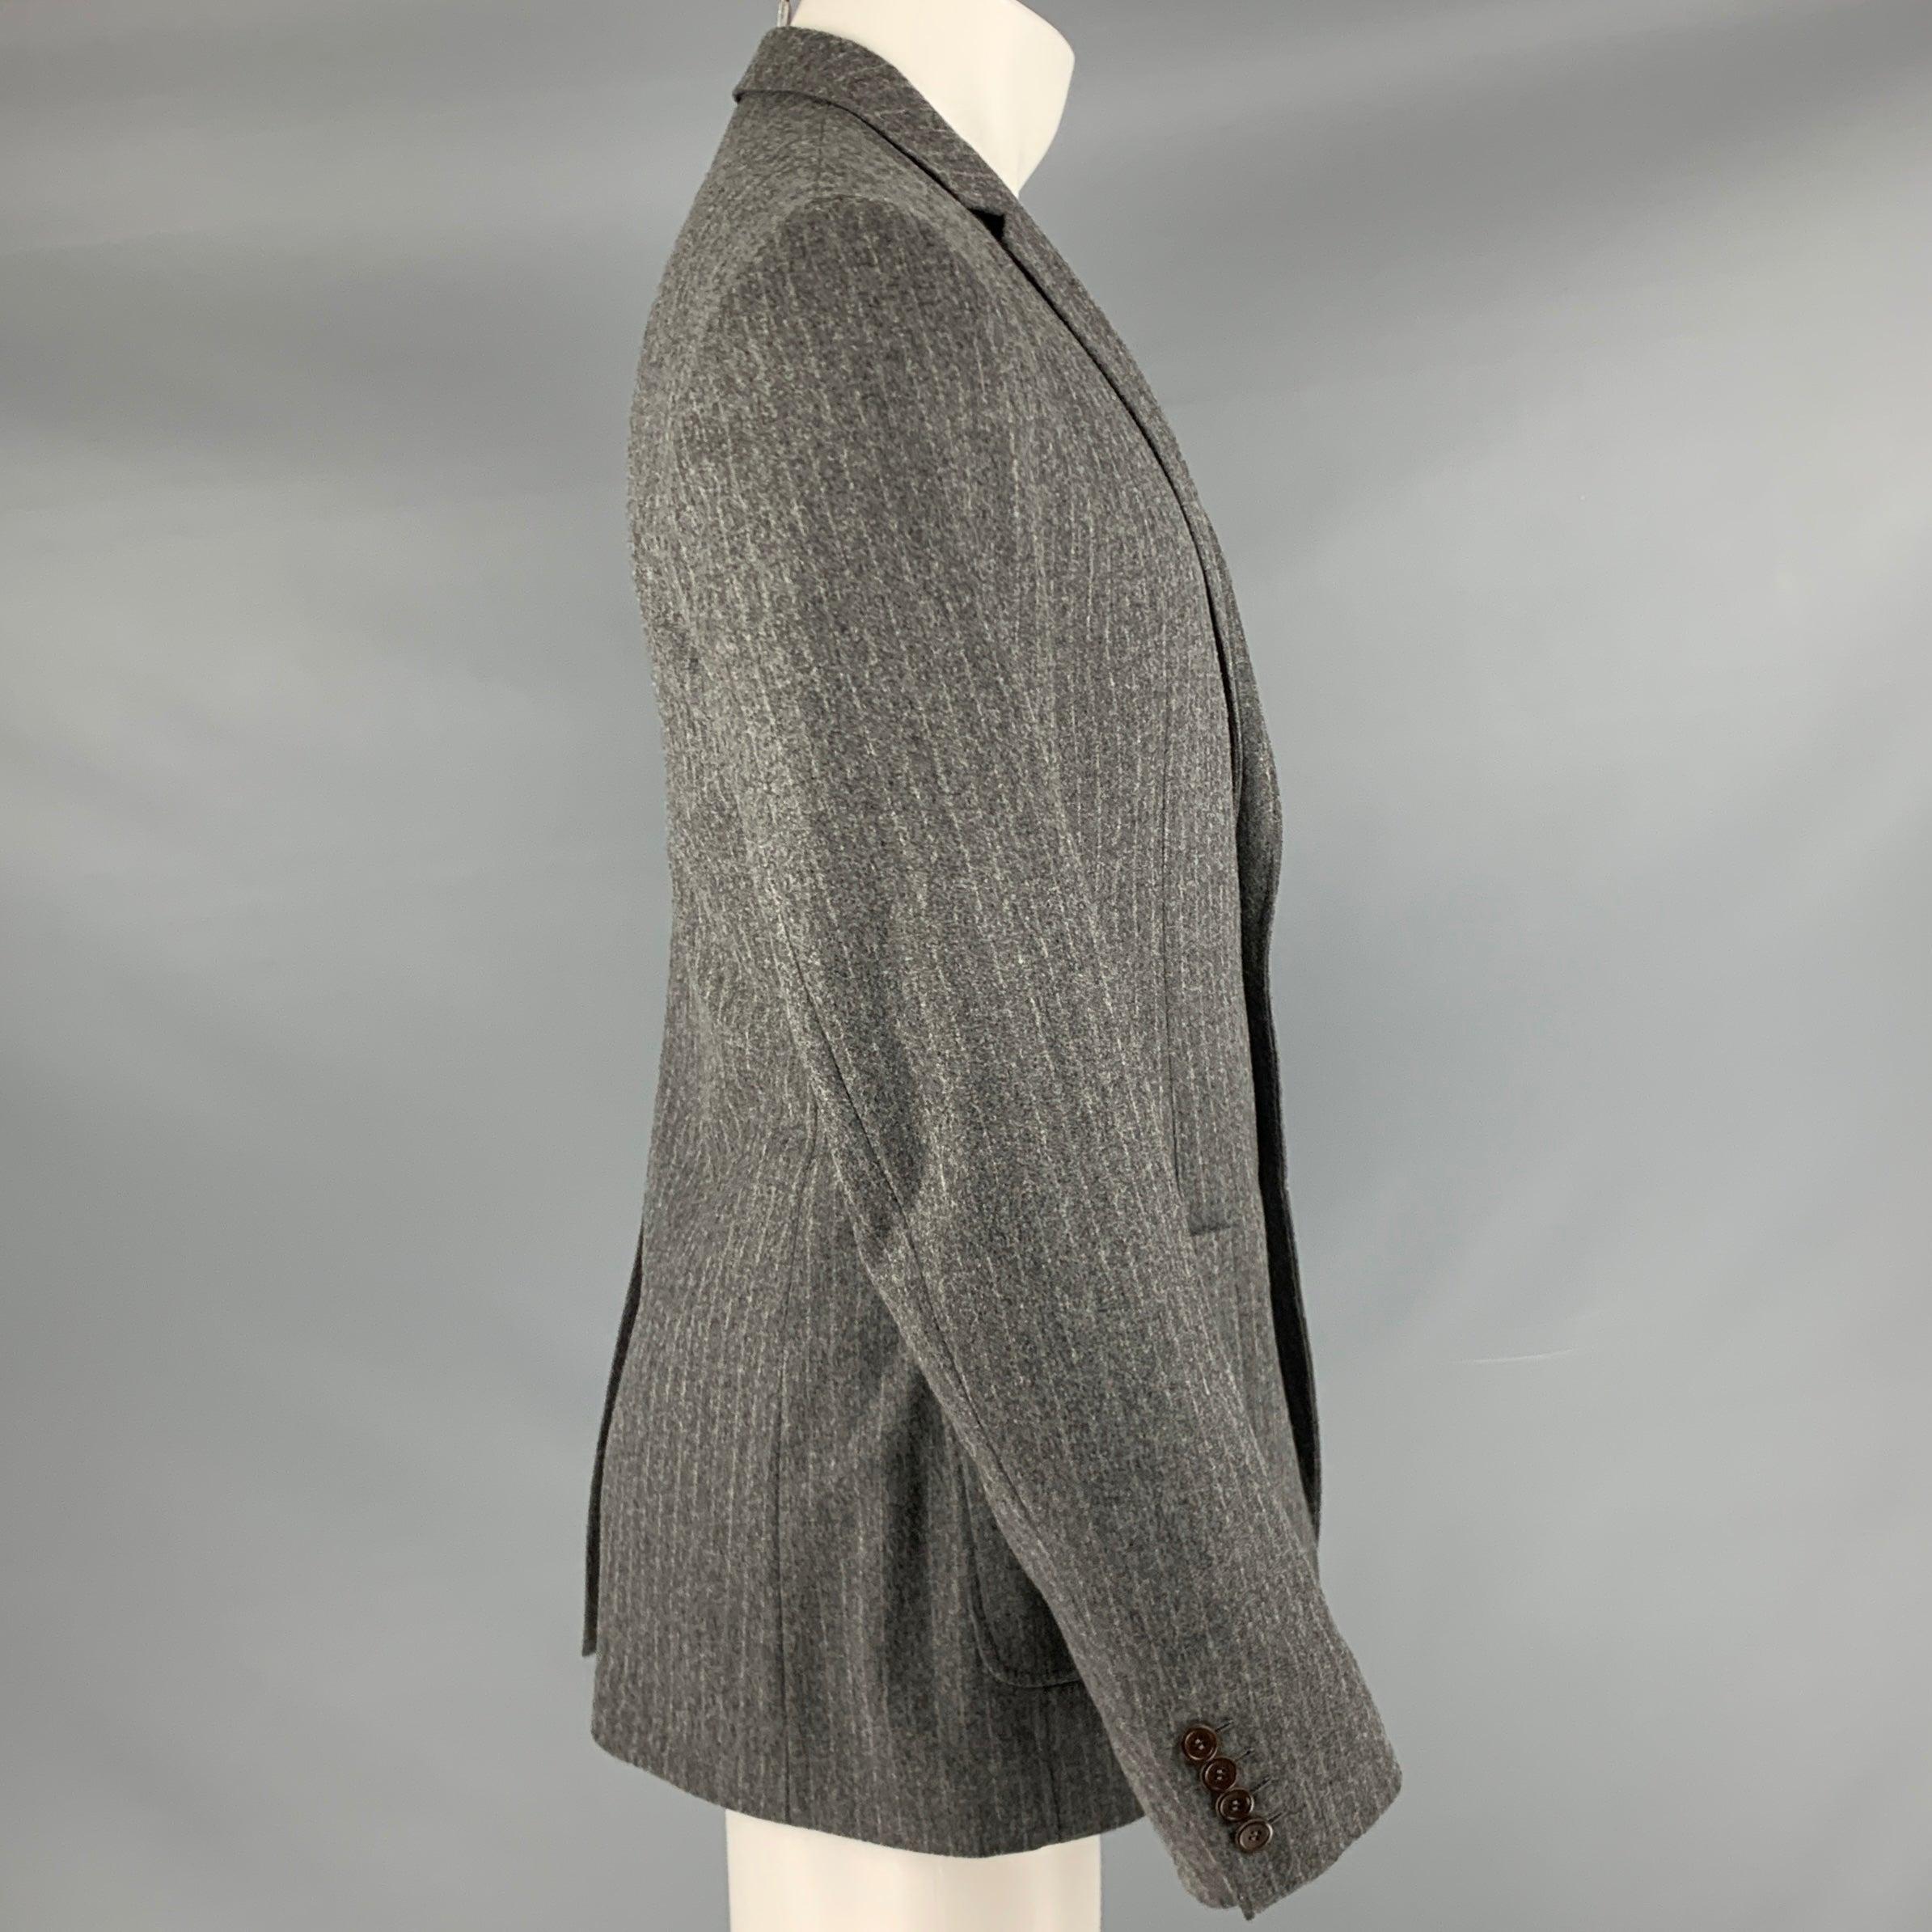 D&G by DOLCE & GABBANA sport coat
in a
grey wool blend fabric featuring a stripe pattern, notch lapel, single vented back, and double button closure.Very Good Pre-Owned Condition. Signs of wear on top button. 

Marked:   IT 50 

Measurements: 
